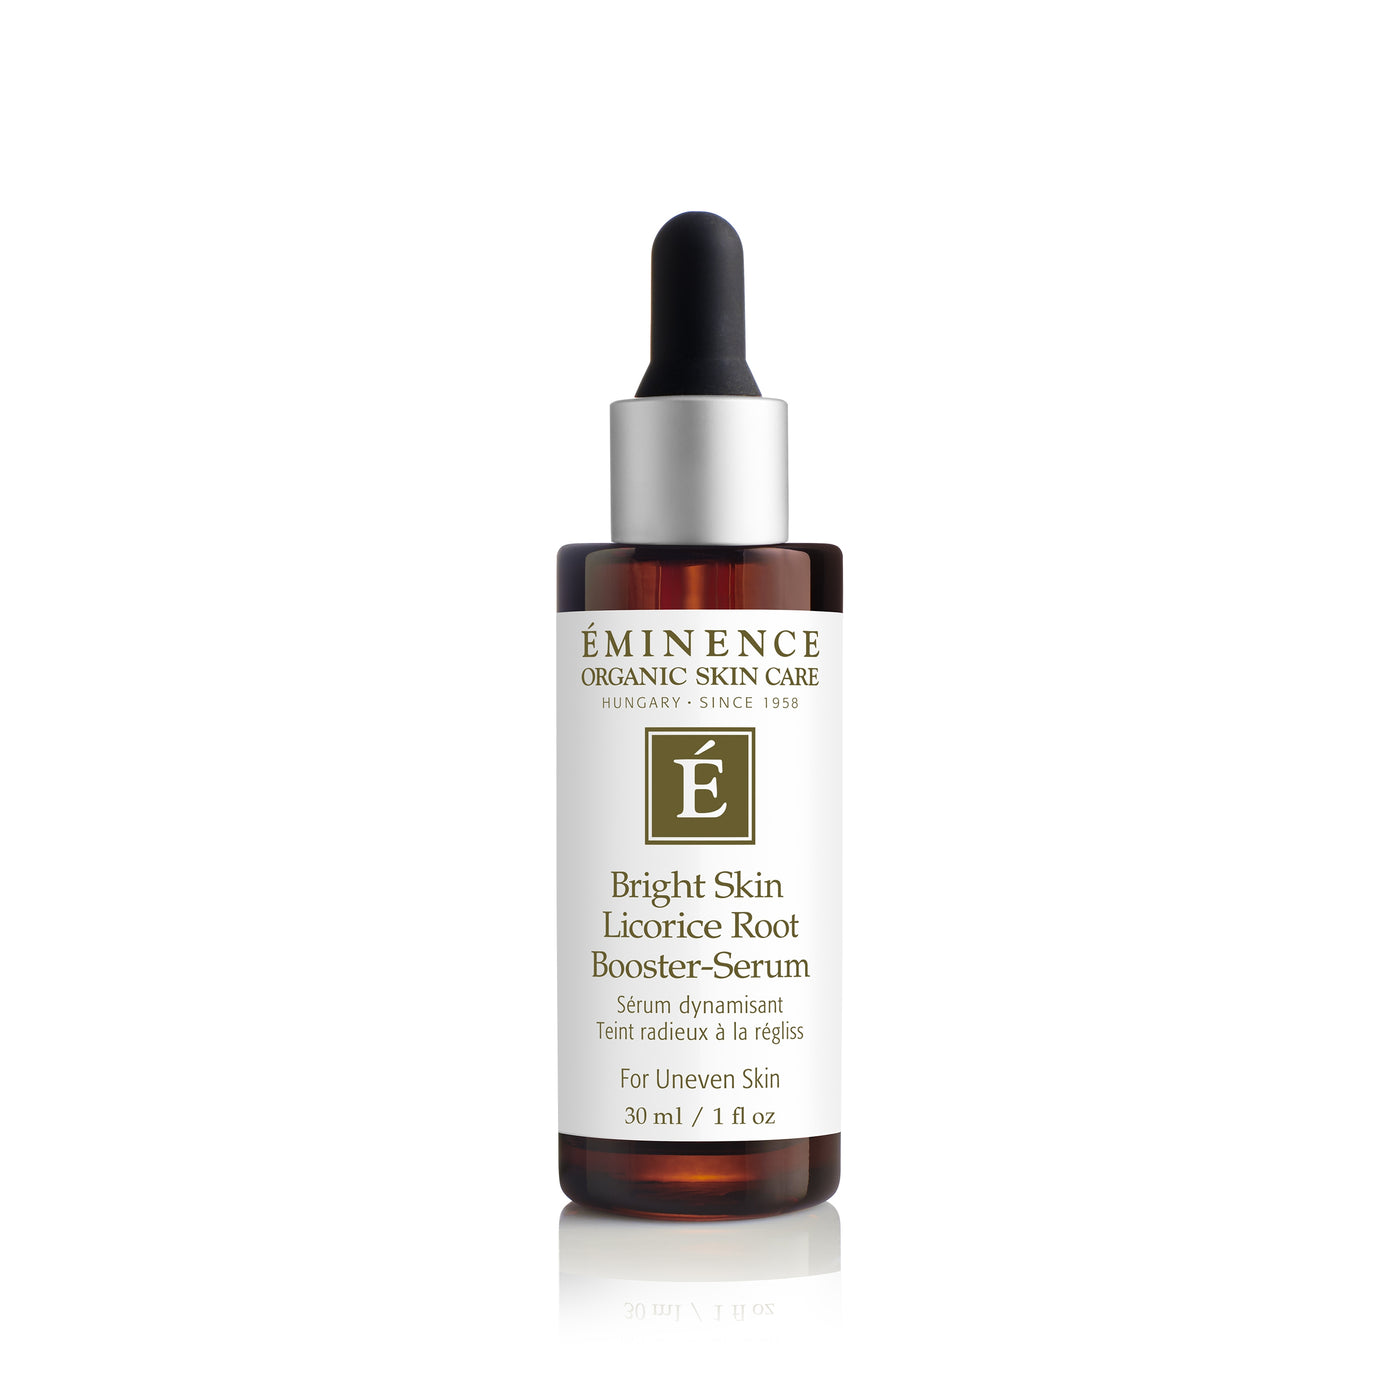 Eminence Organics Bright Skin Licorice Root Booster-Serum - Radiance Clean Beauty